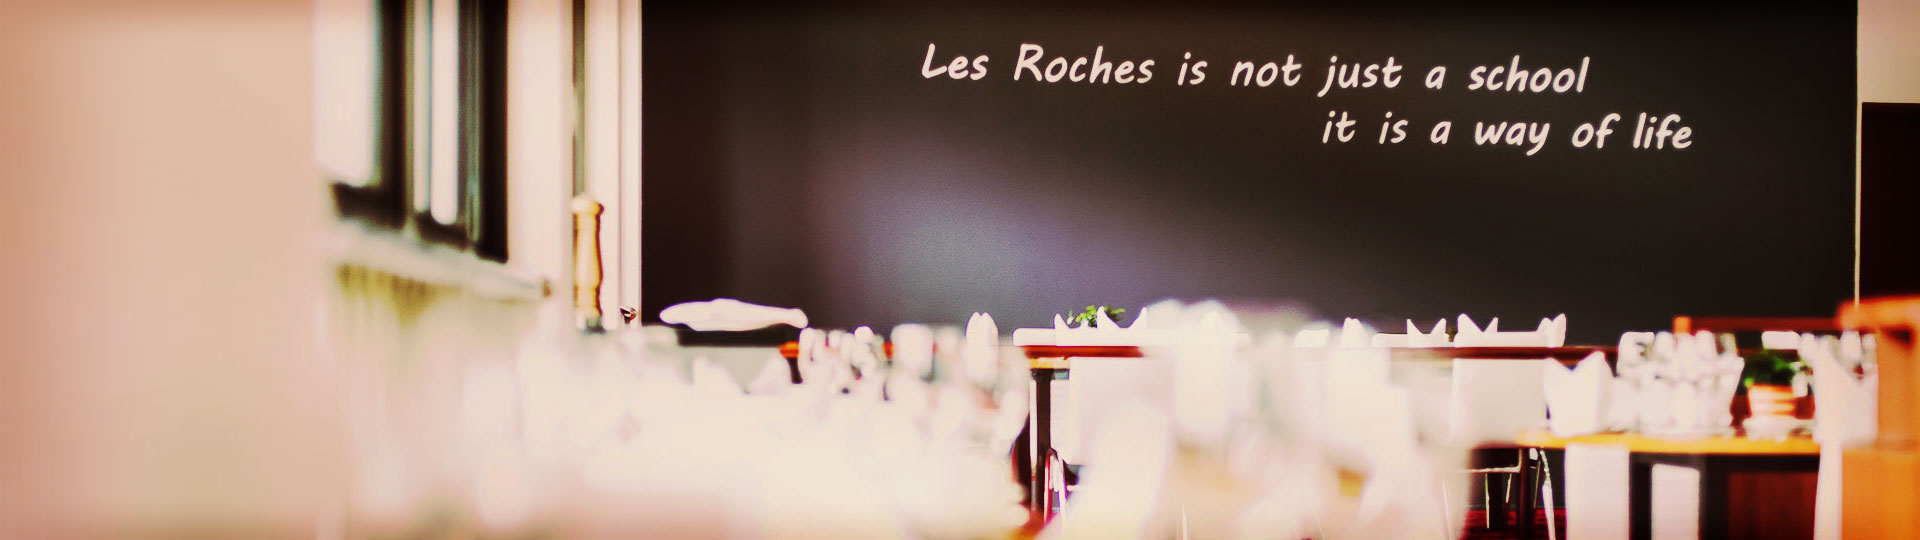 About Les Roches banner